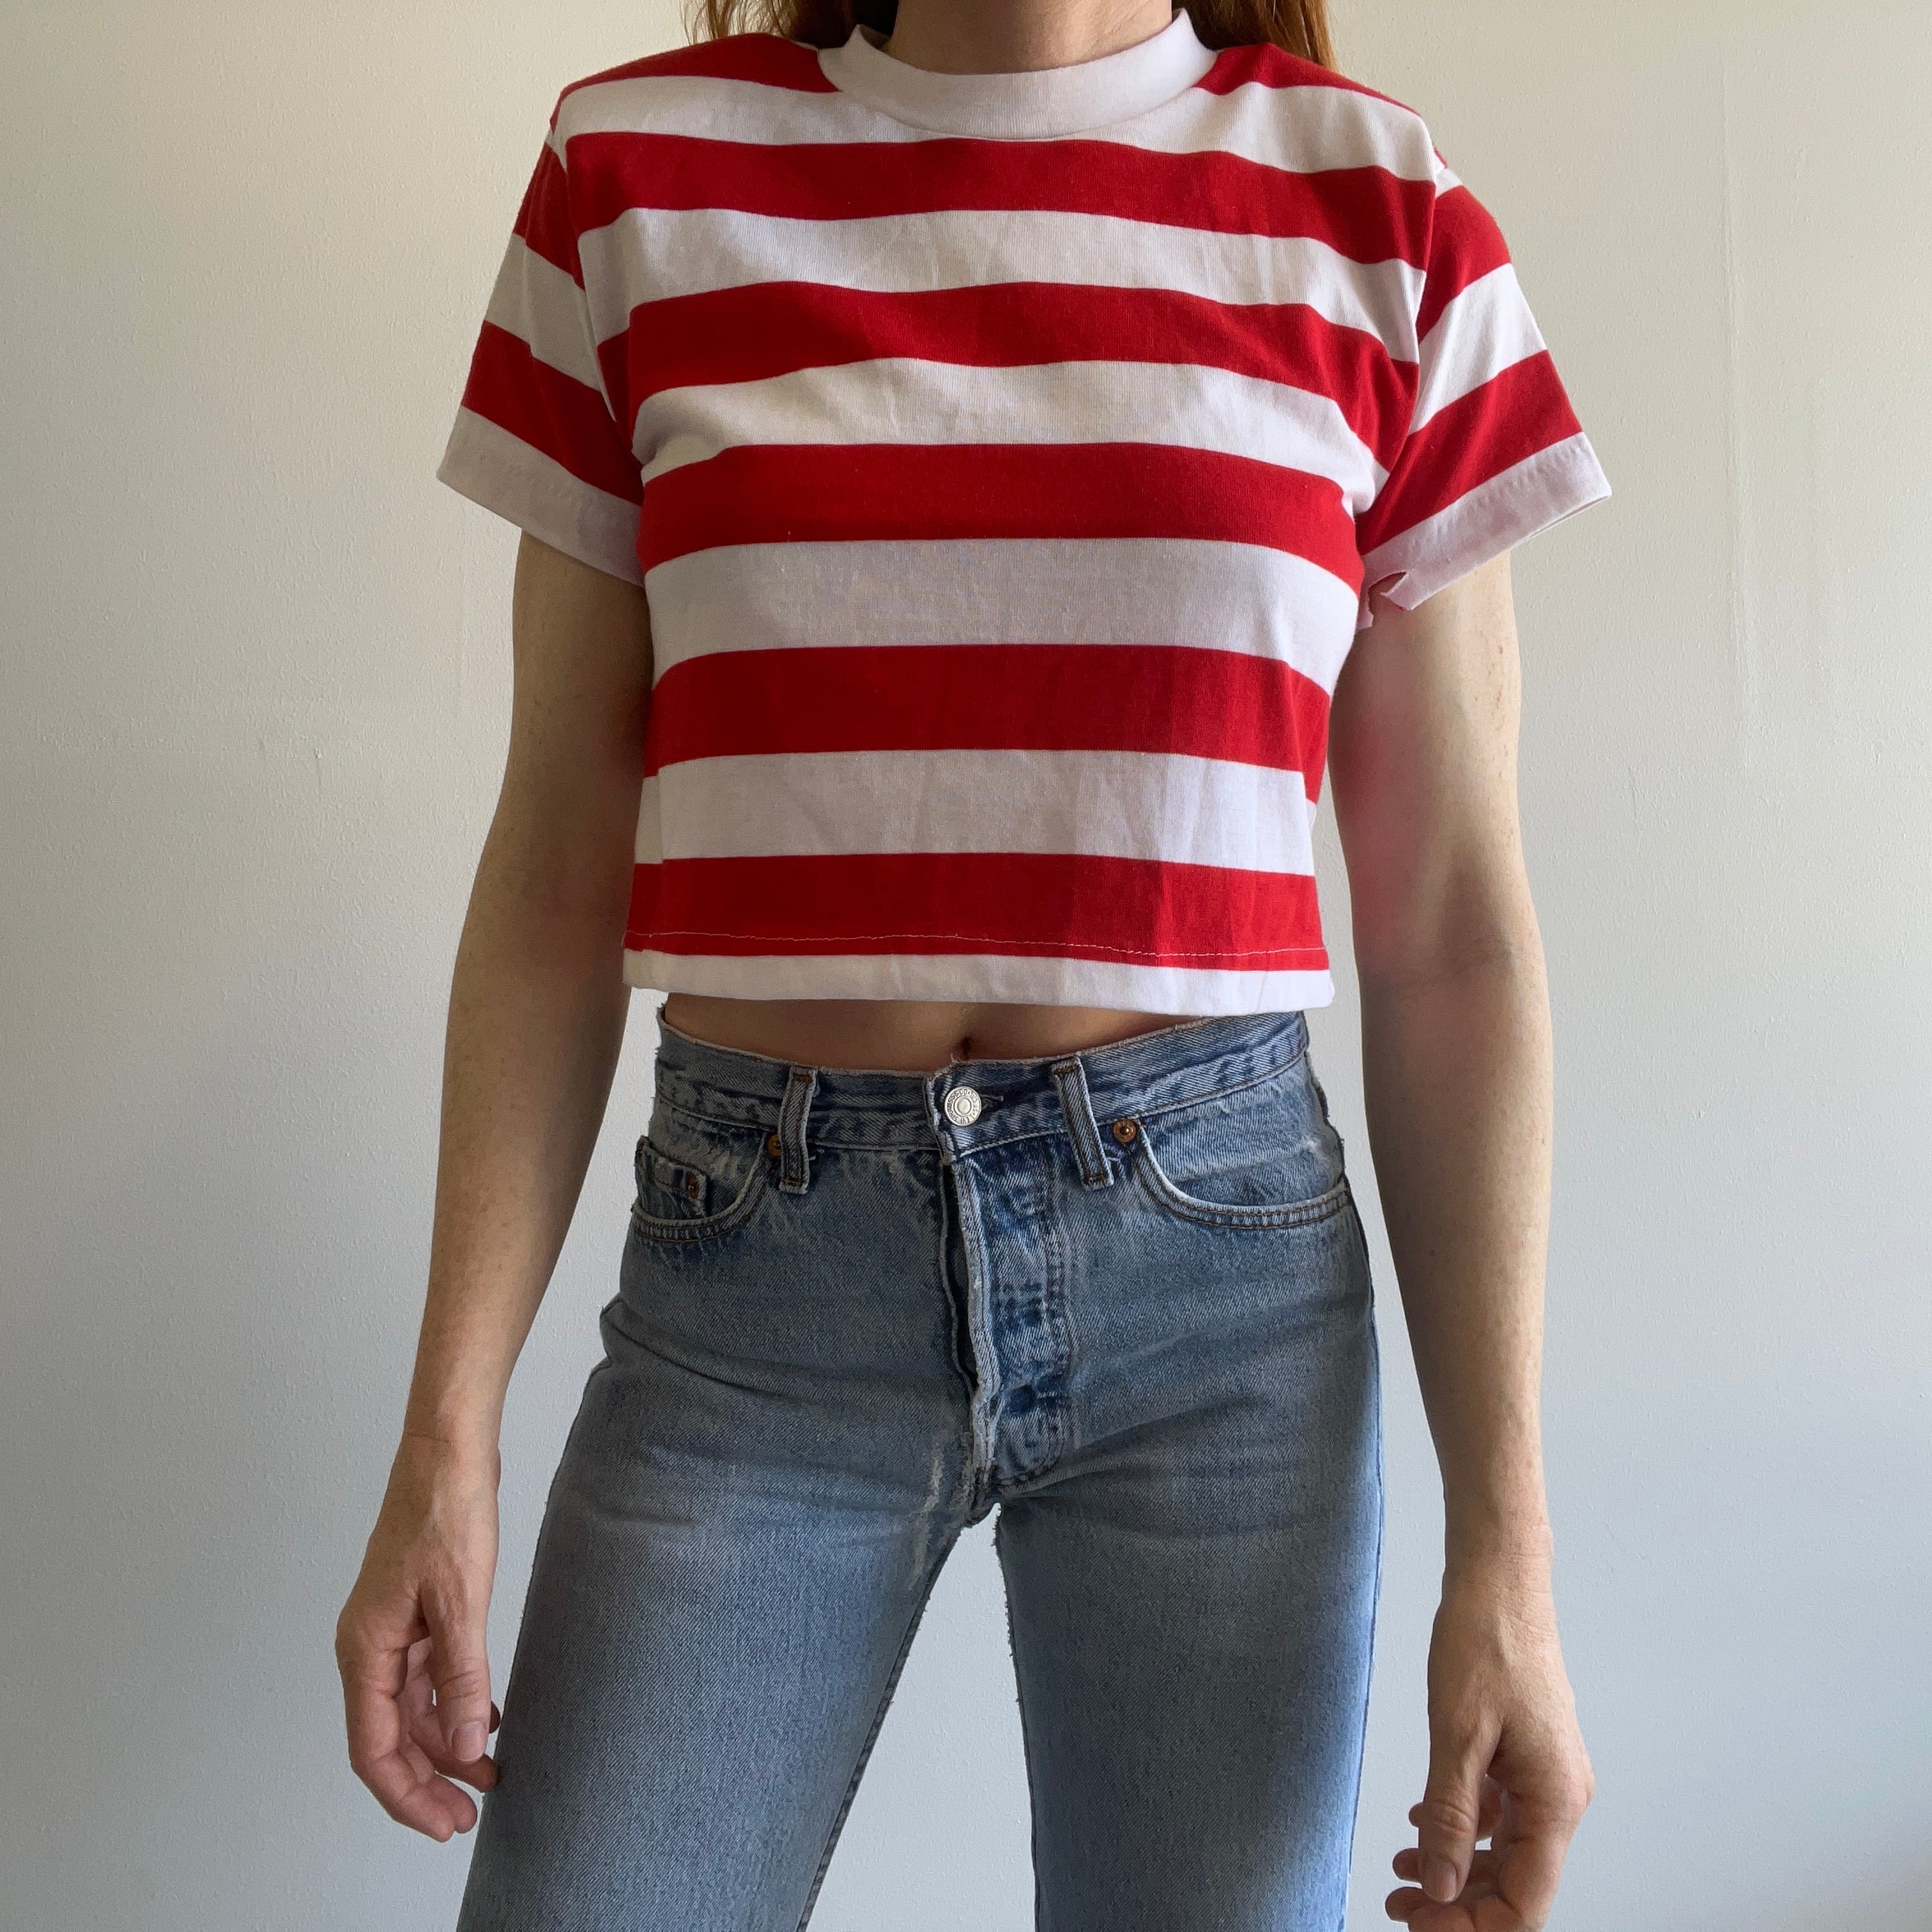 1980s Red and White Crop Top with Shoulder Pads!